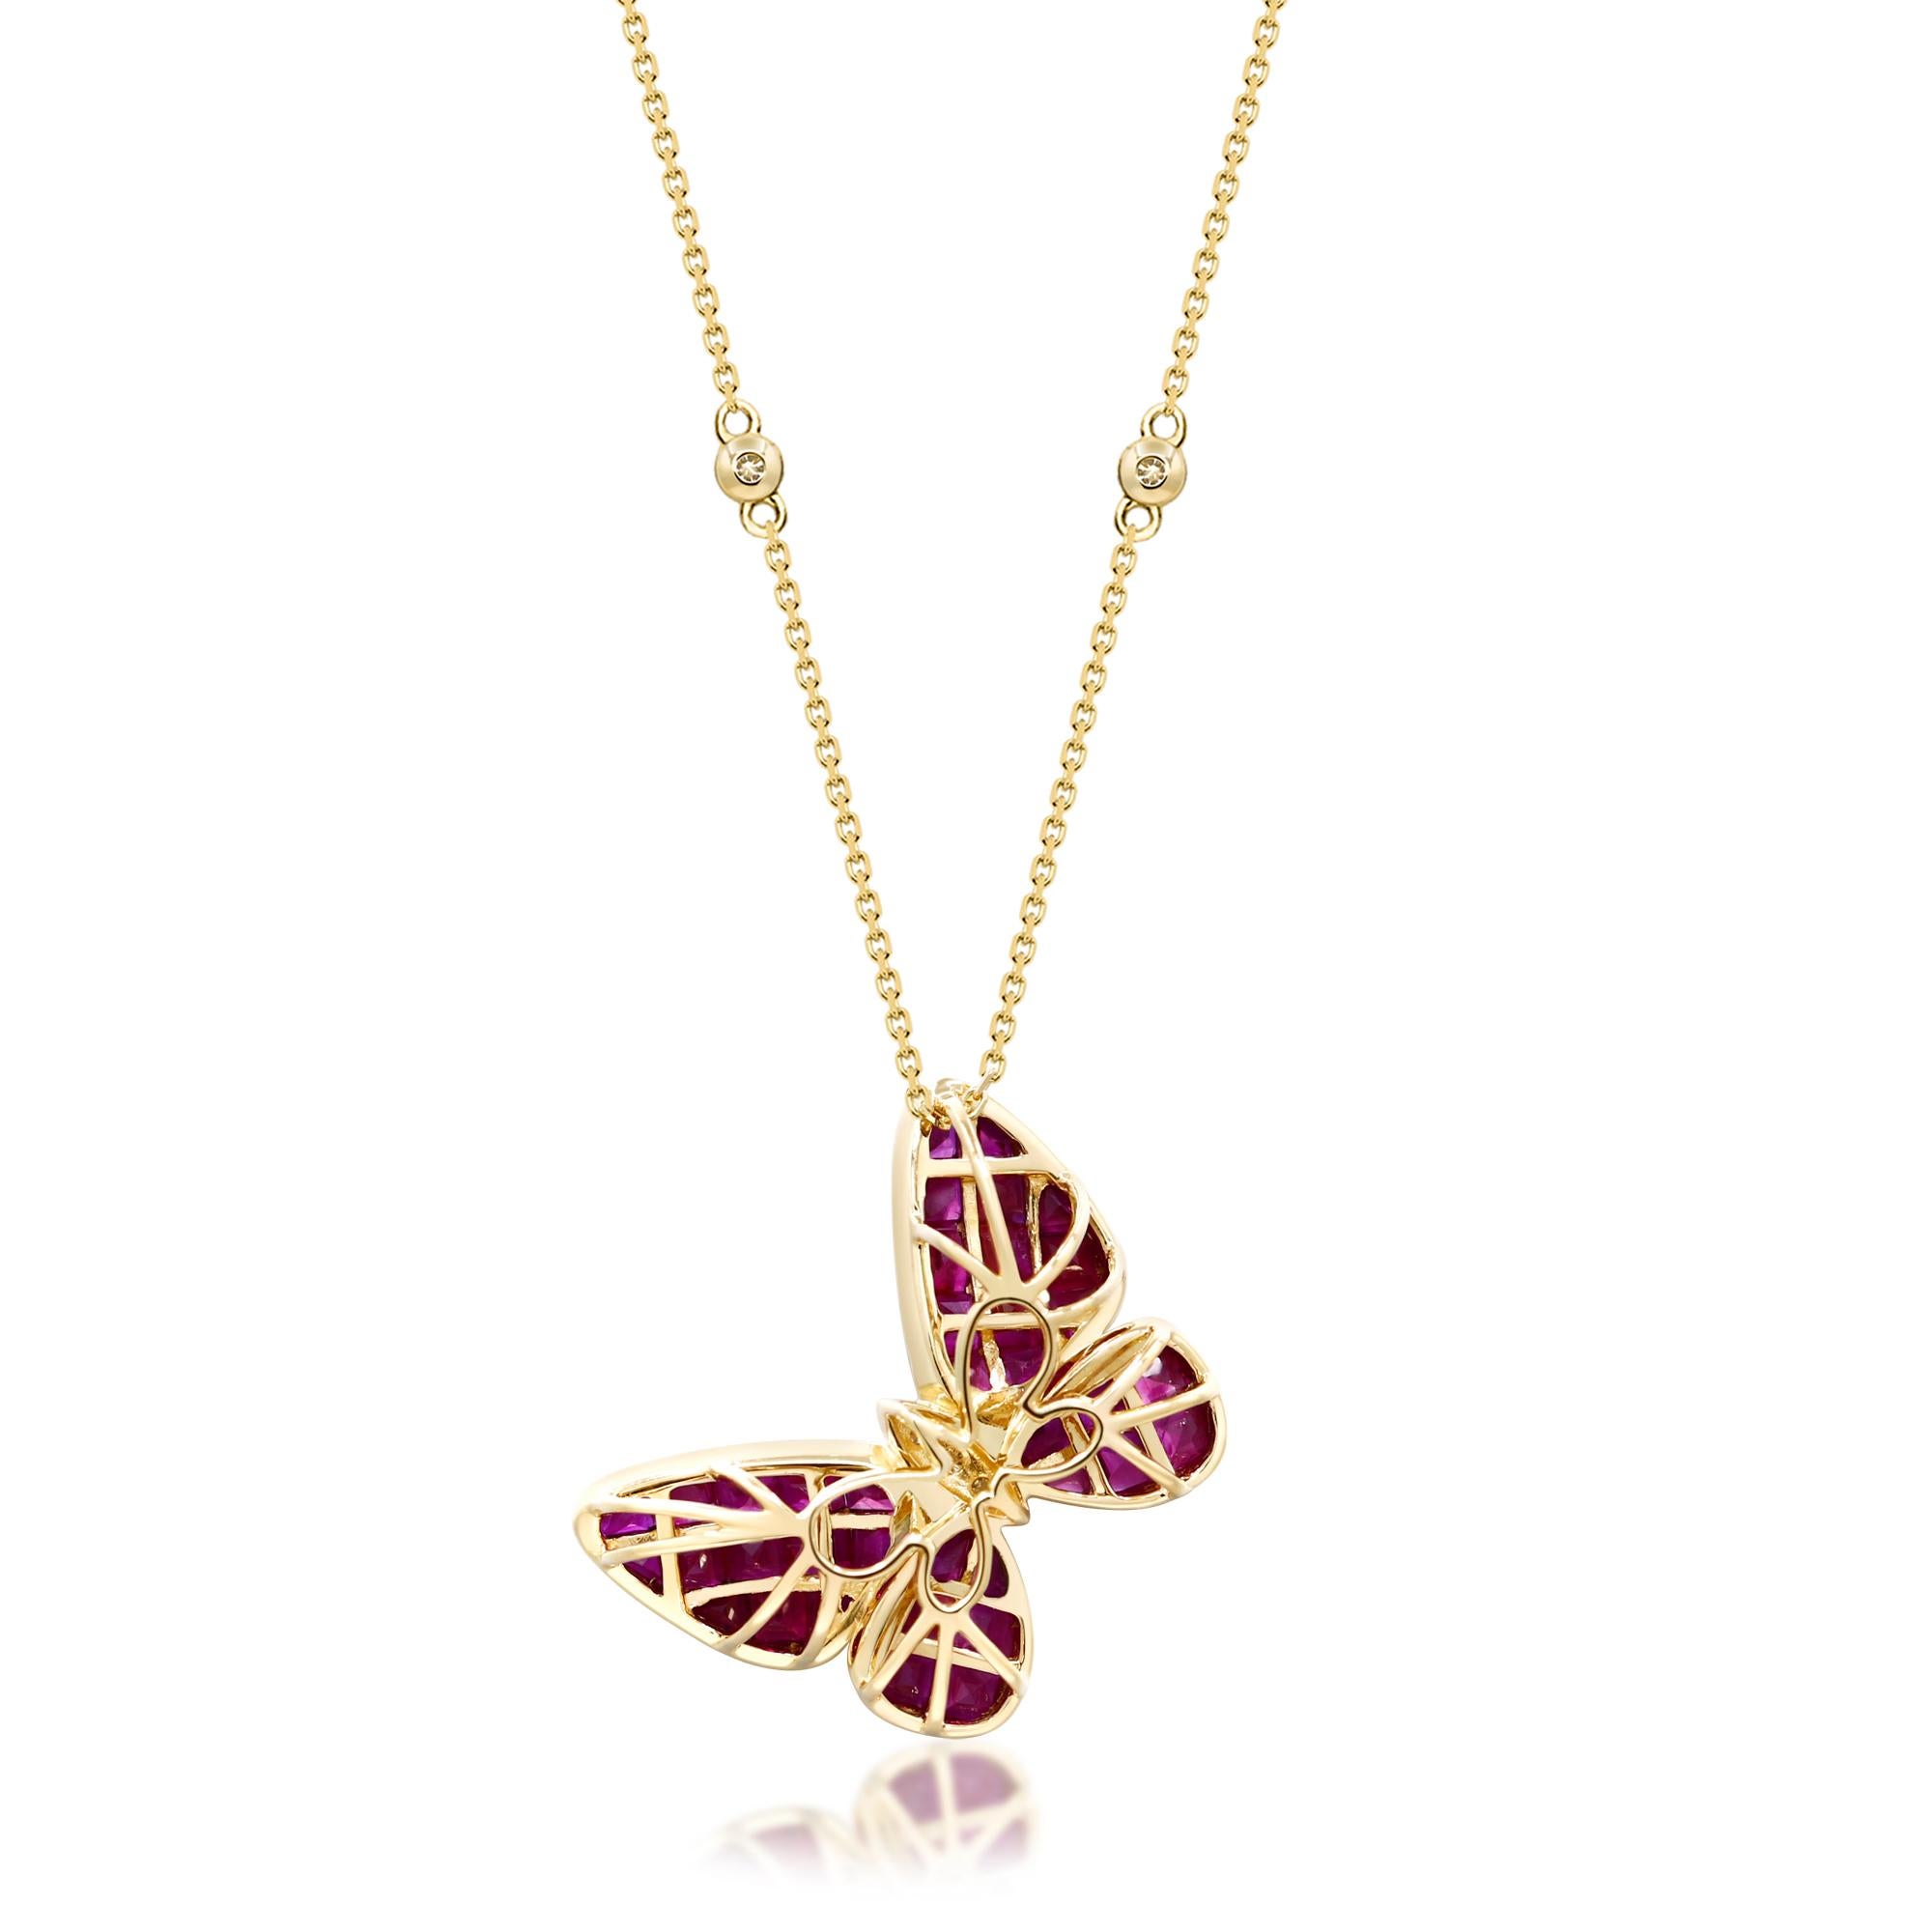 Square Cut Edith 14K Yellow Gold Square-Cut Ruby Pendant For Sale